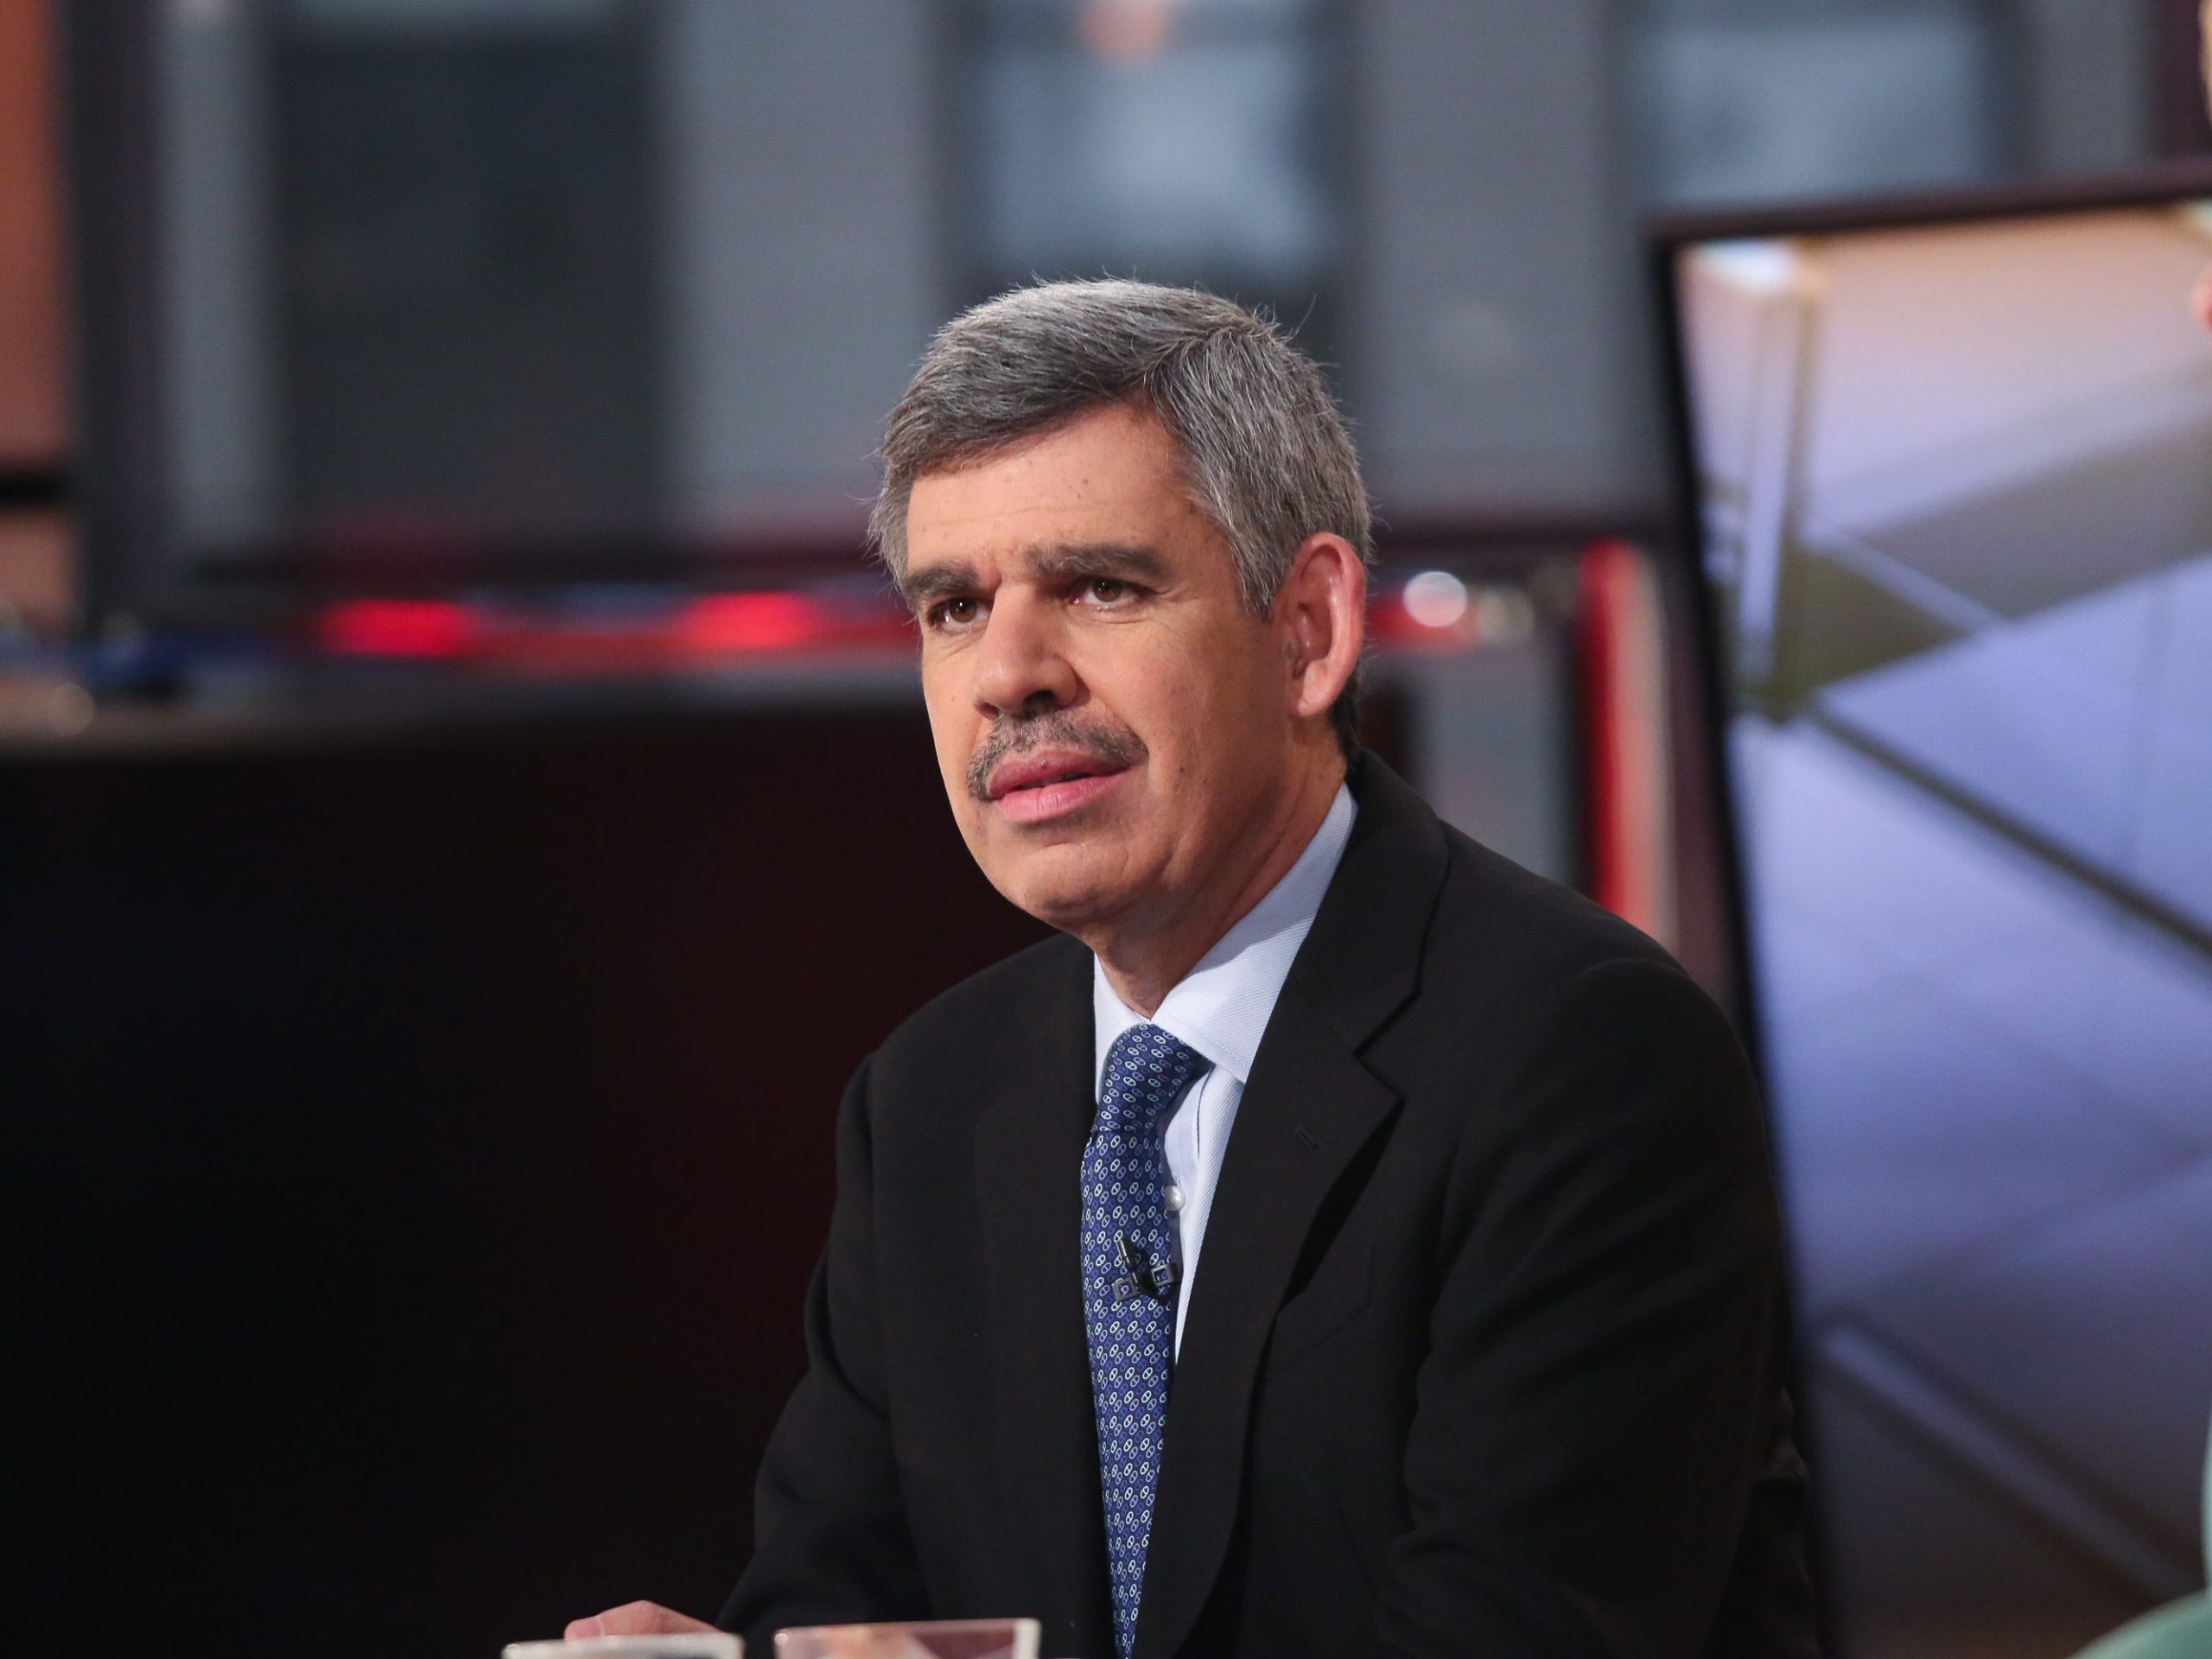 Mohamed El-Erian, Chief Economic Adviser of Allianz appears on a segment of "Mornings With Maria" with Maria Bartiromo on the FOX Business Network at FOX Studios on April 29, 2016 in New York City..